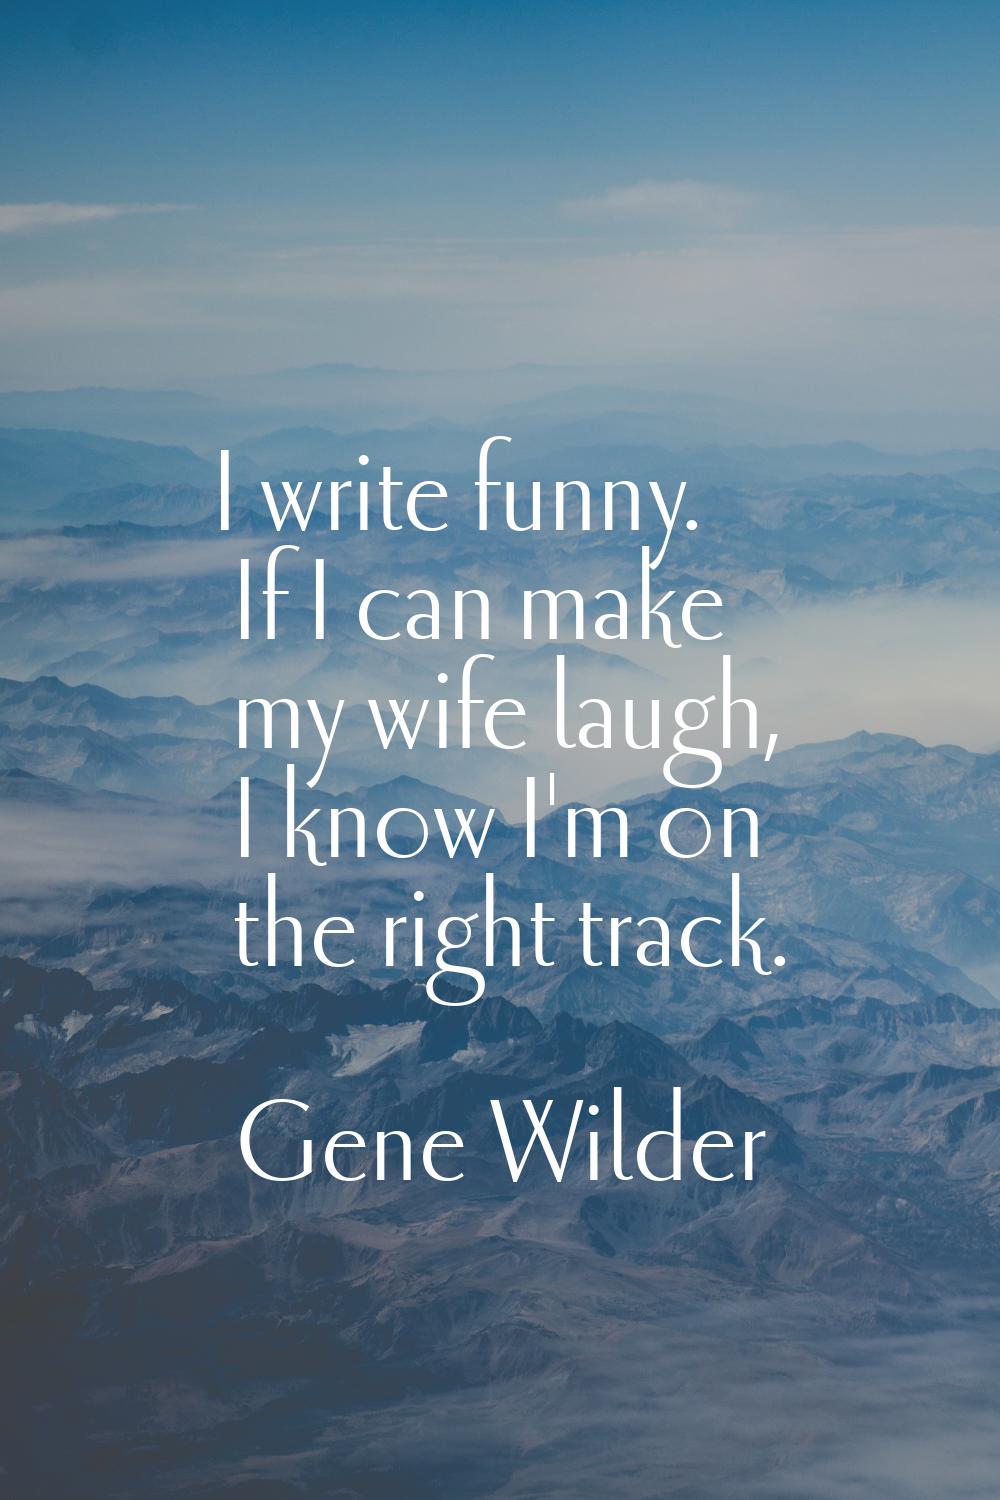 I write funny. If I can make my wife laugh, I know I'm on the right track.